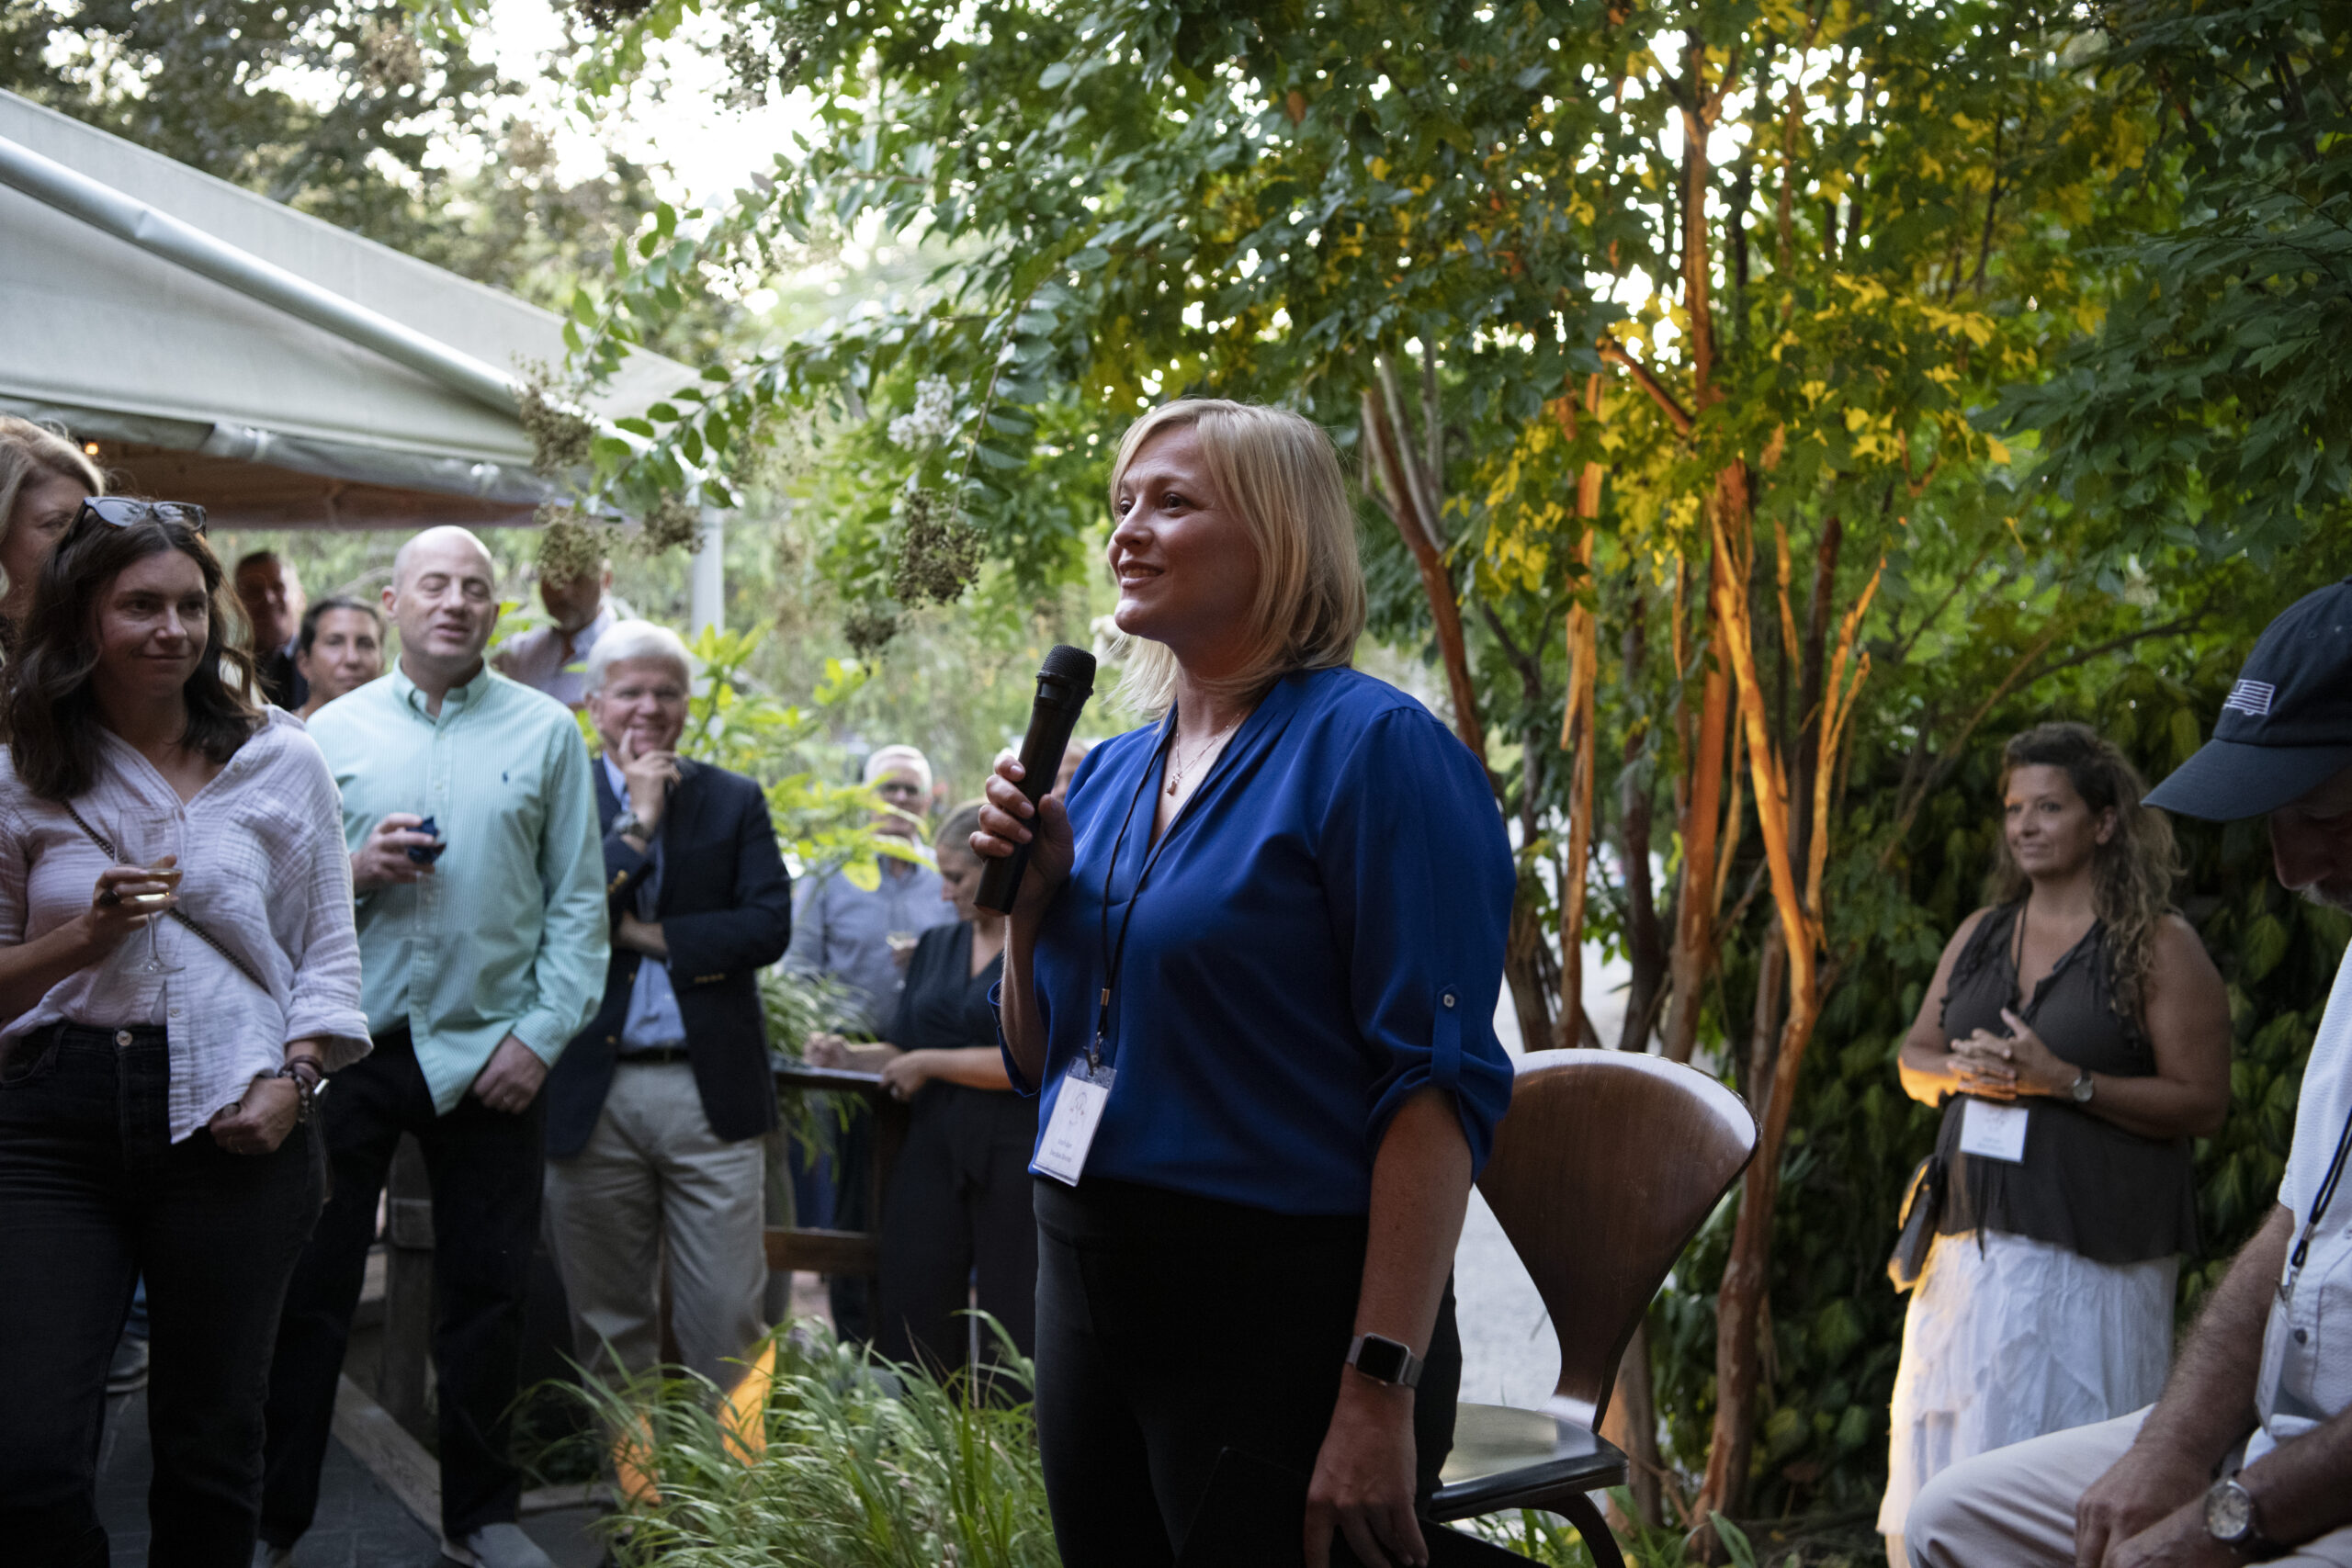 East End Food Institute Executive Director Kate Fullam addresses supporters at the cocktail event at Nick and Toni's Restaurant in East Hampton on September 15. COURTESY EAST END FOOD INSTITUTE